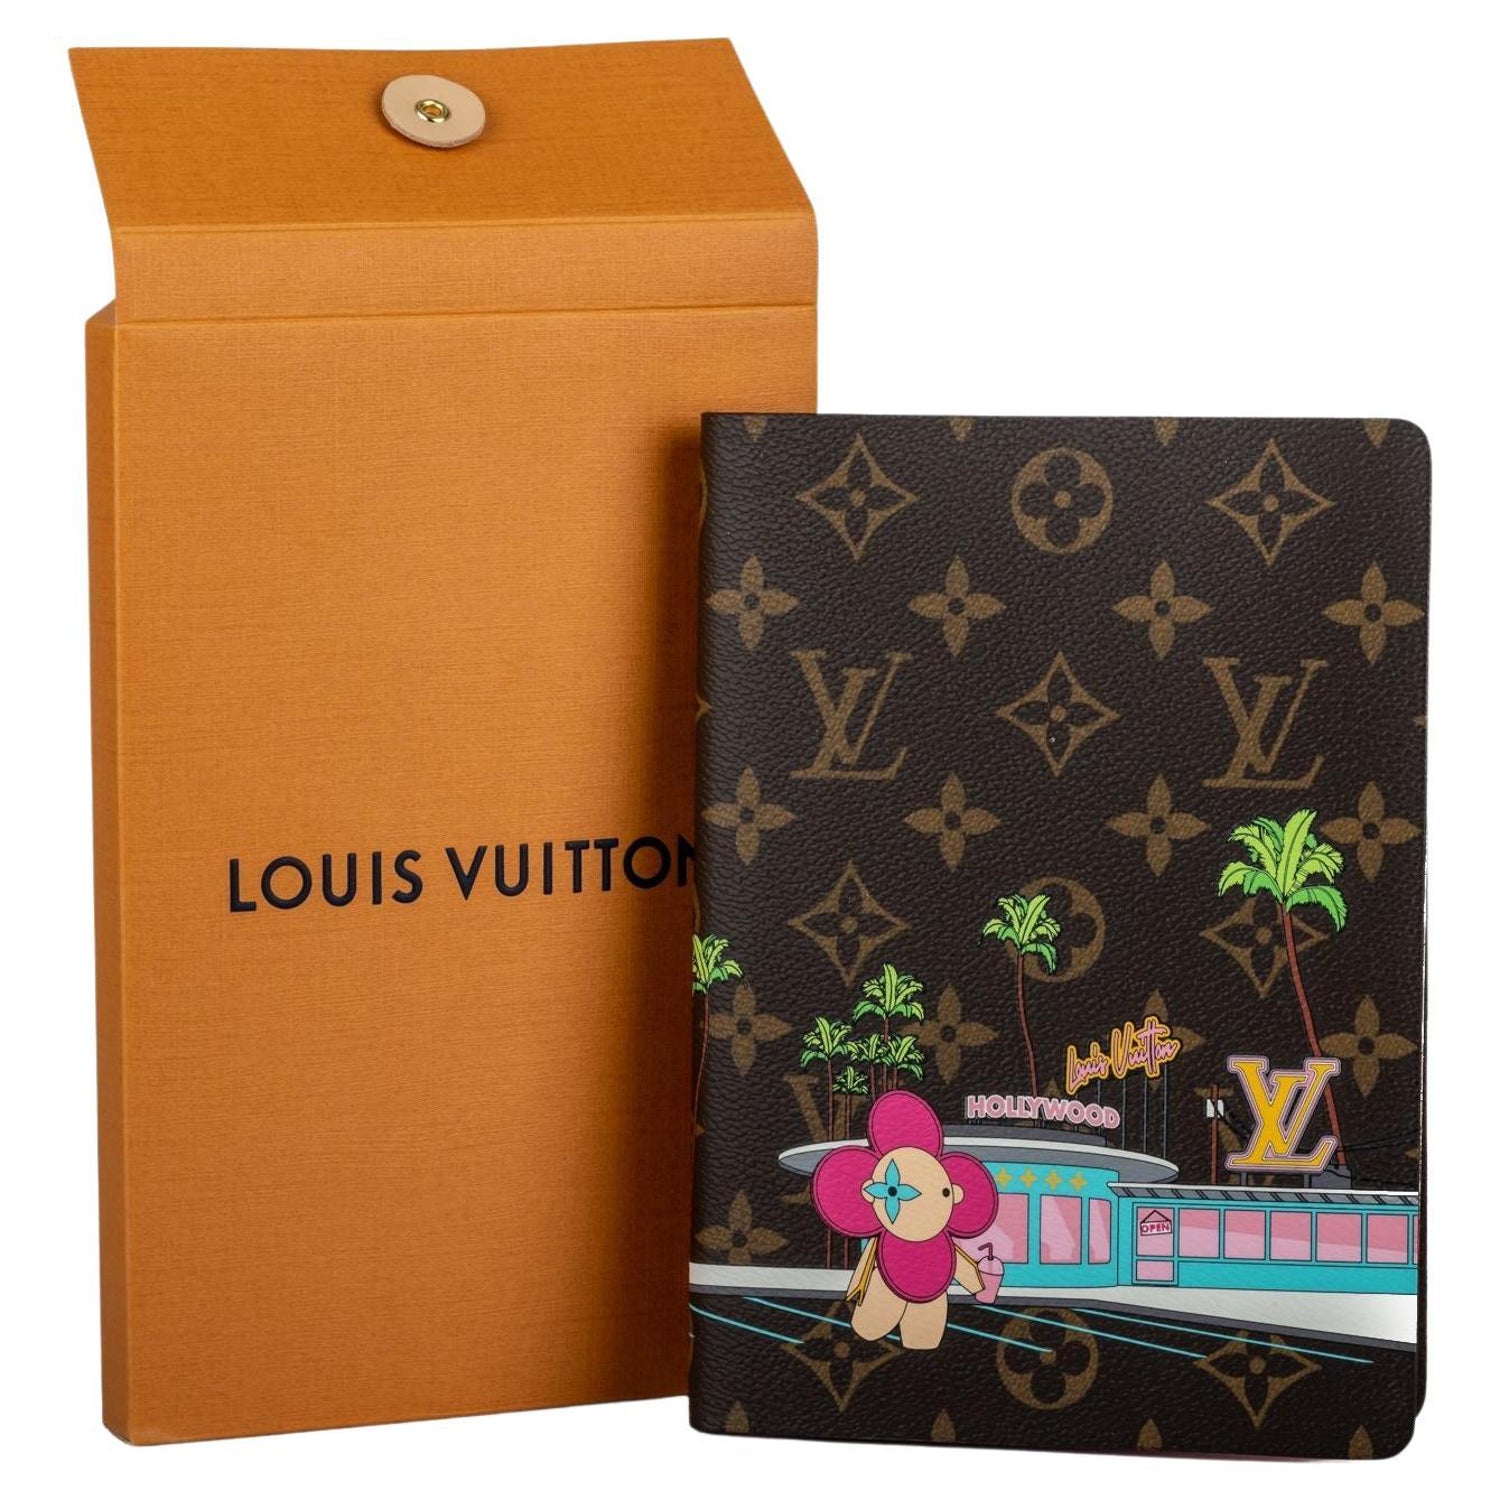 Vivienne, the iconic Louis Vuitton mascot, enters the world of